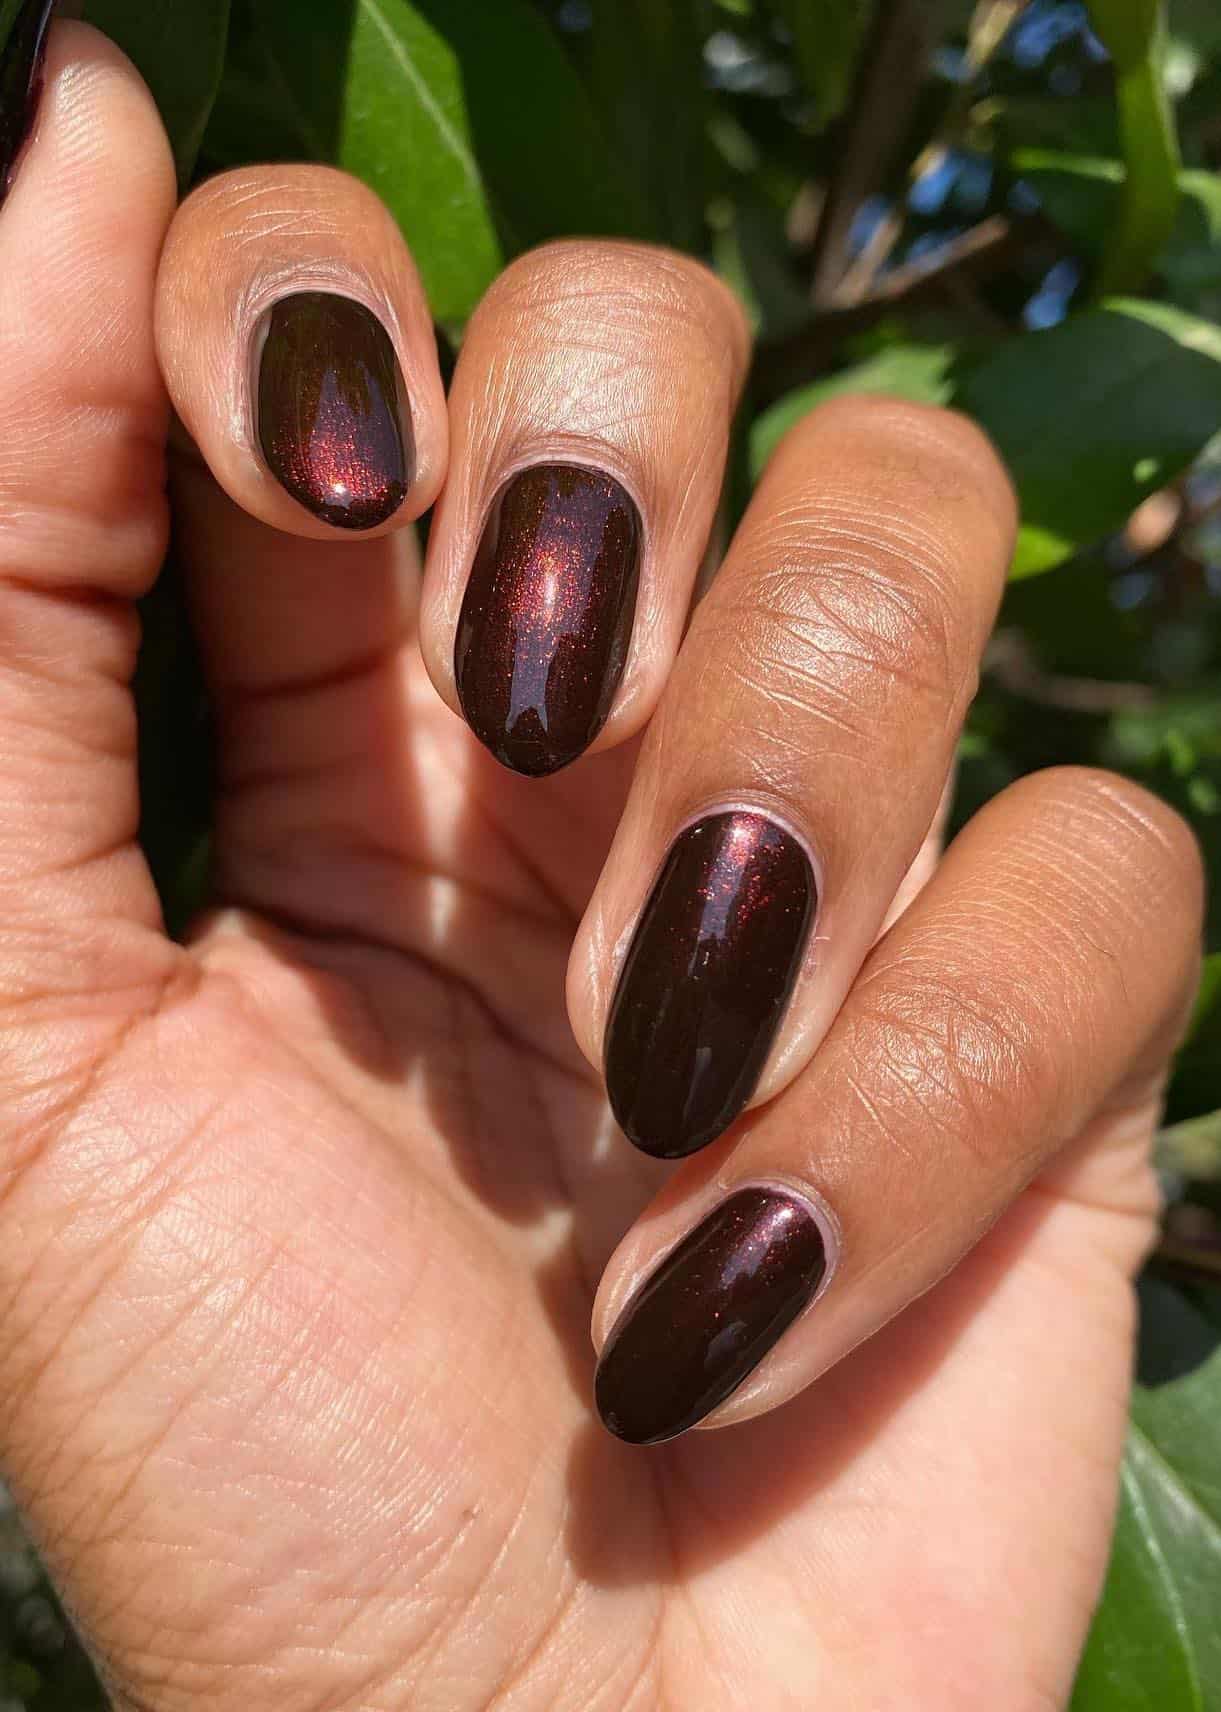 A hand with short almond nails painted with a shimmering dark brown nail polish